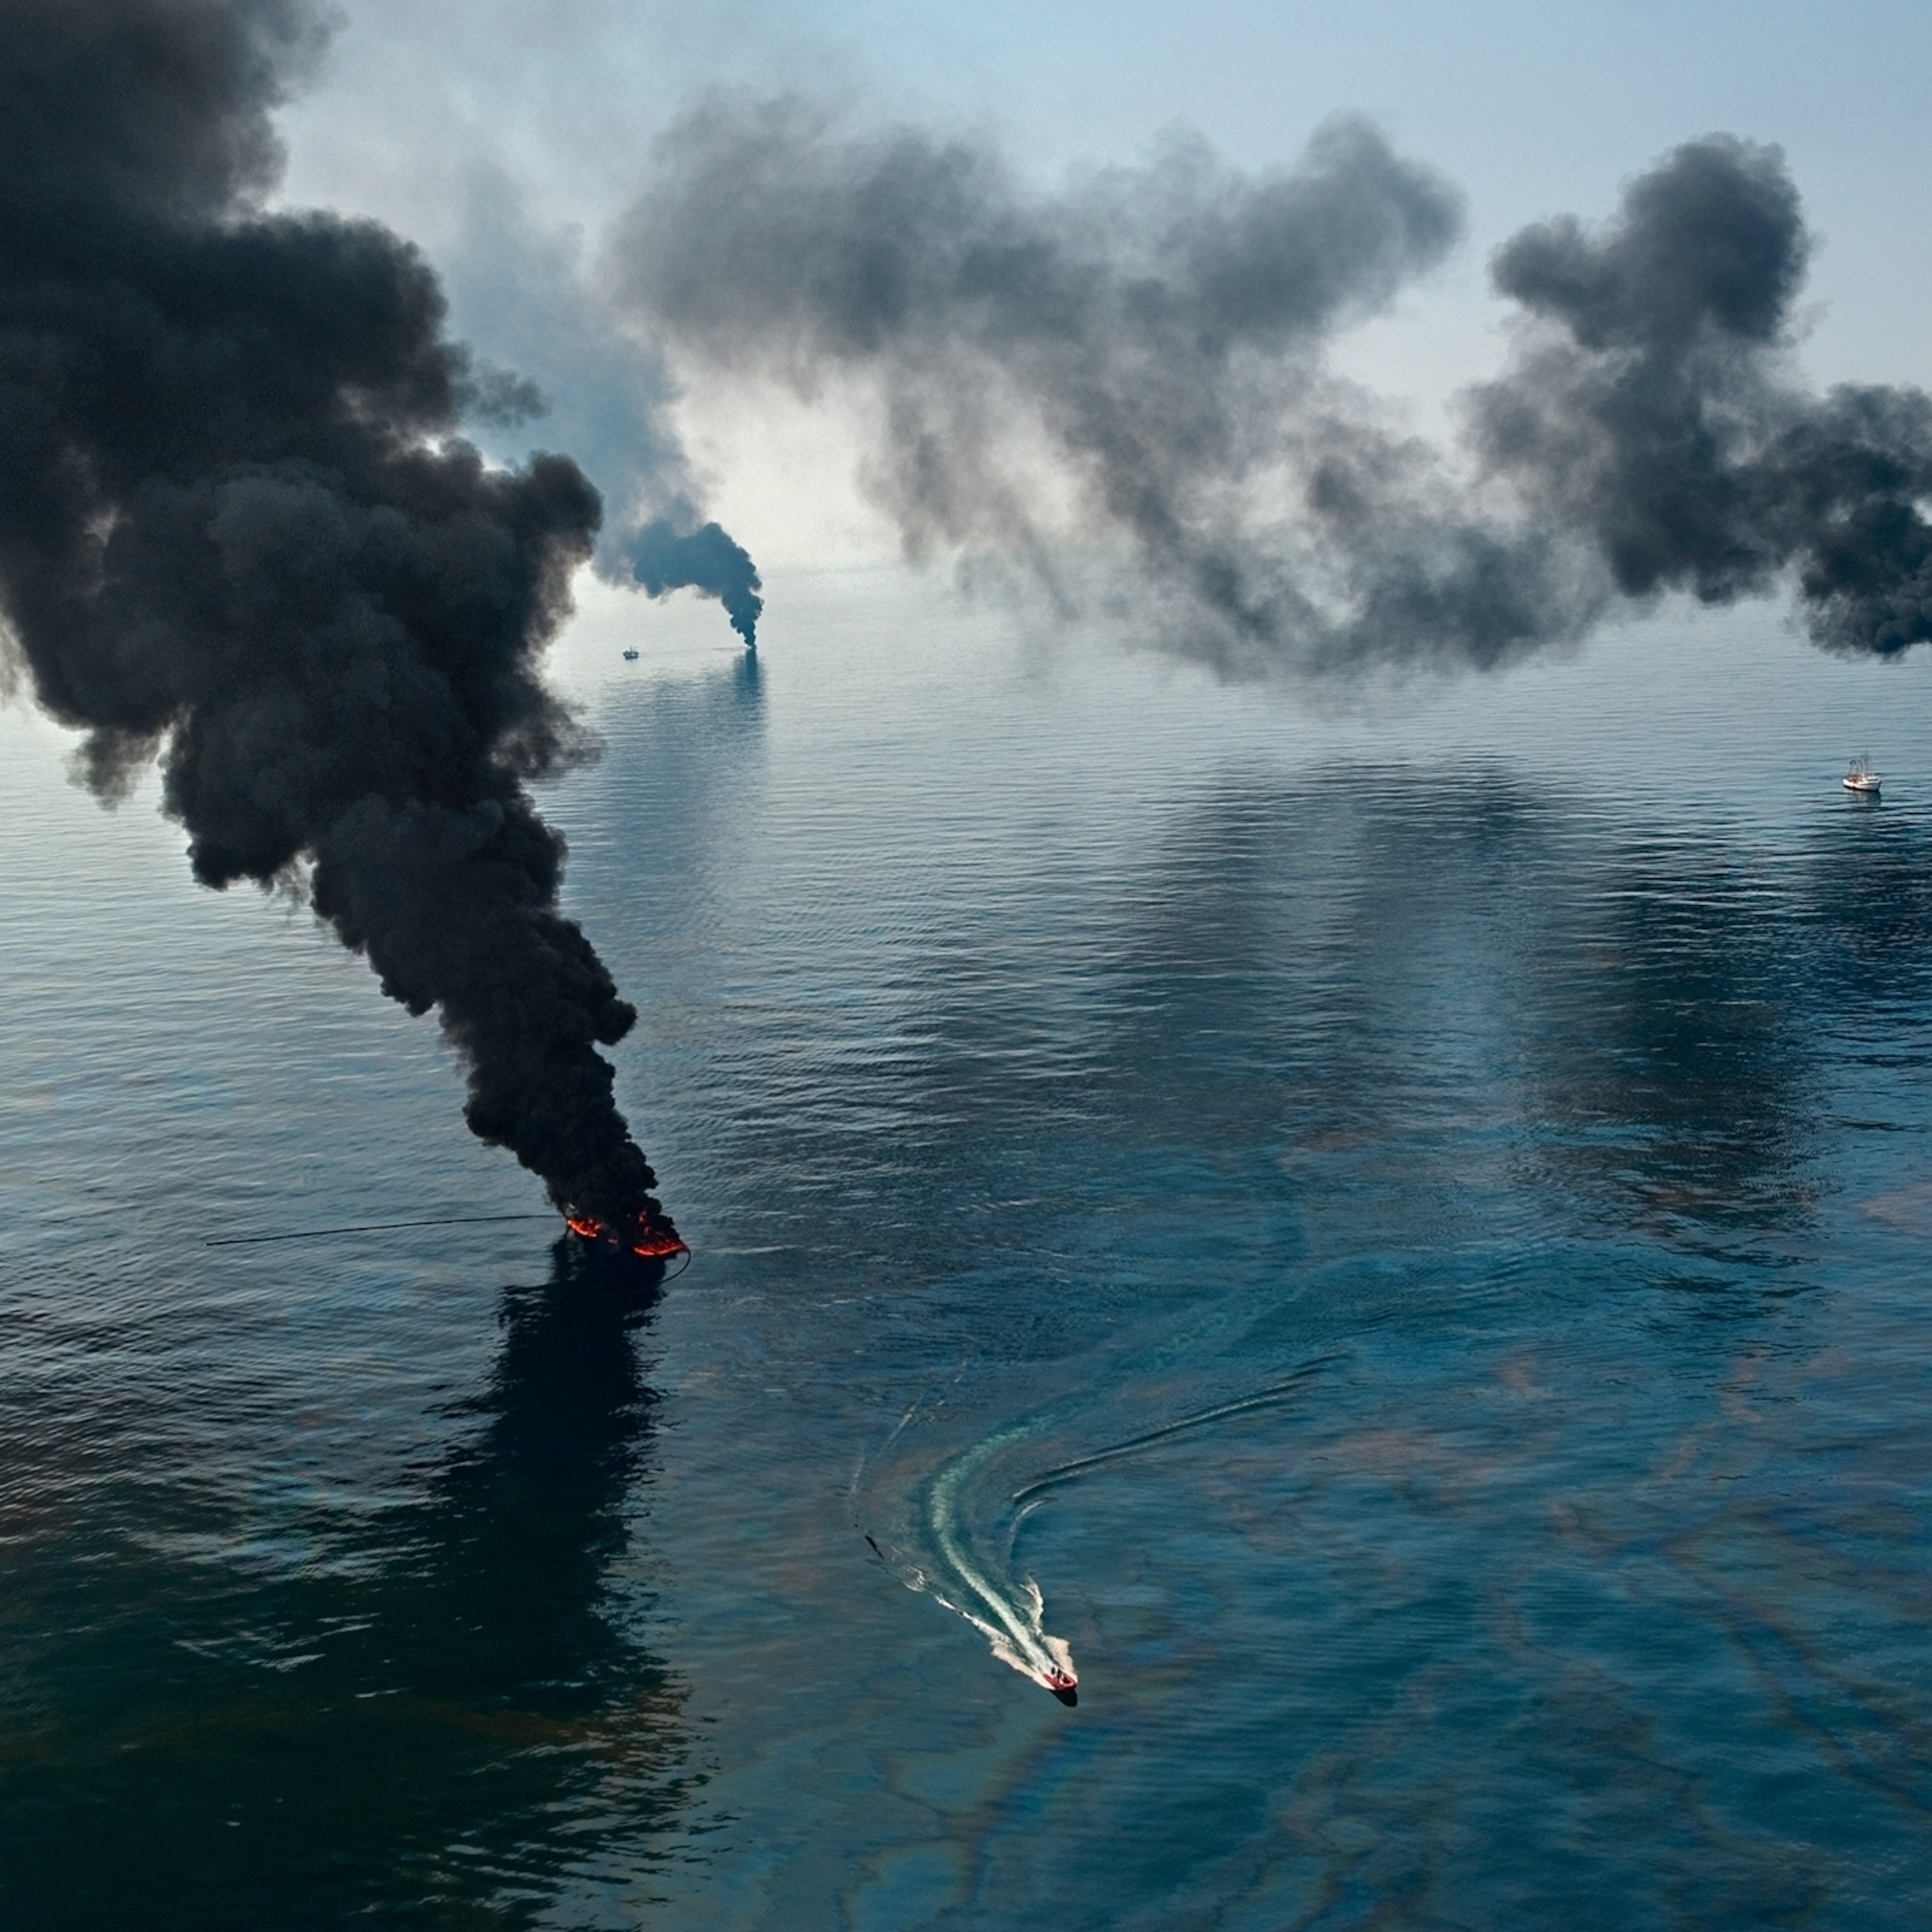 The Deepwater Horizon spill started 10 years ago. Its effects are still playing out